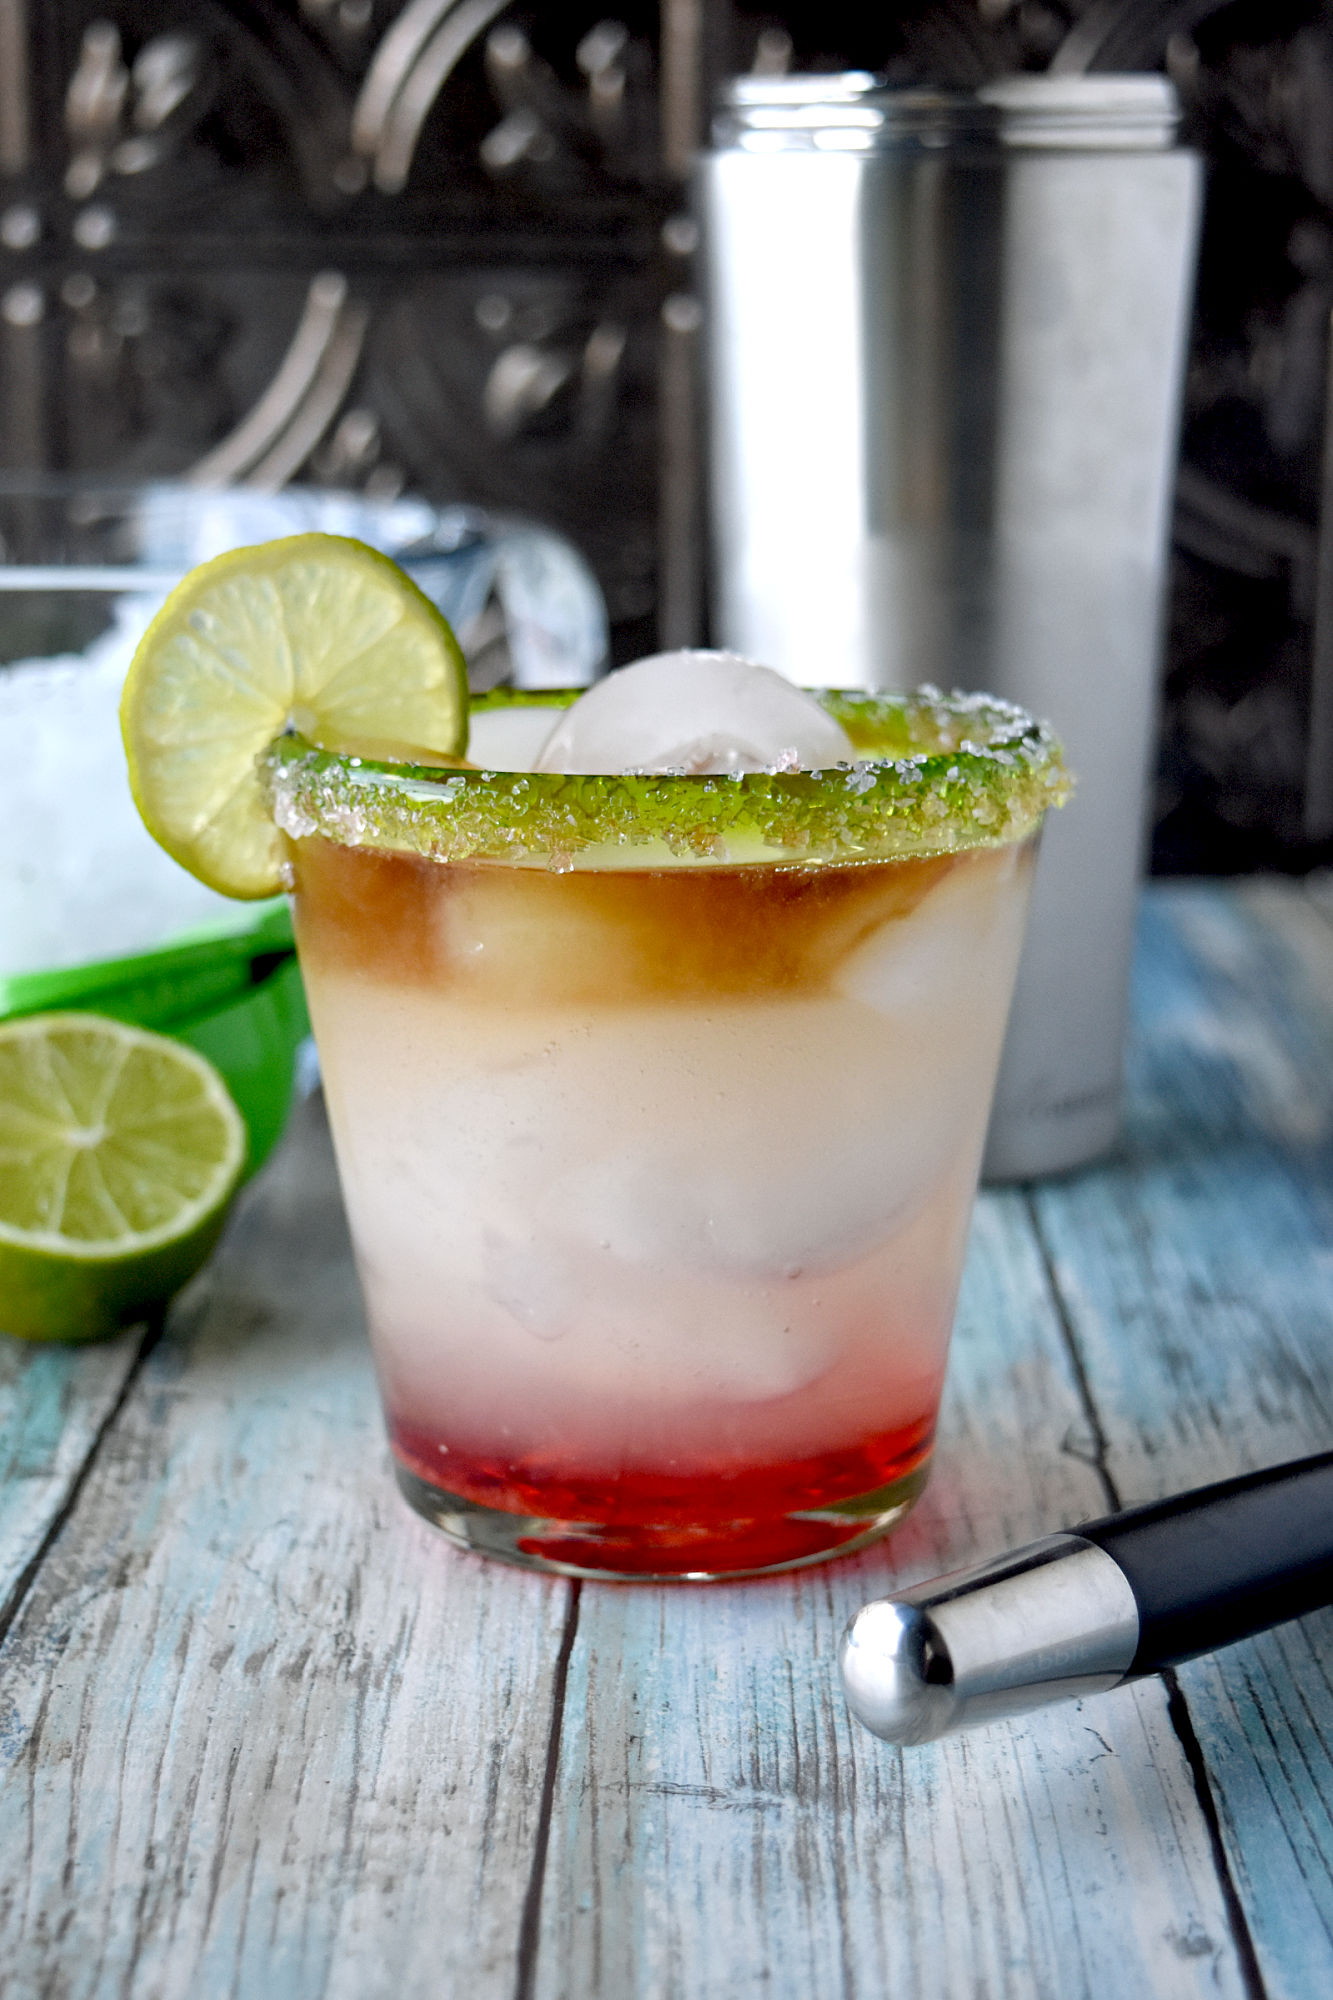 The layers of the Mai Tai Margarita are simply delicious and colorful.